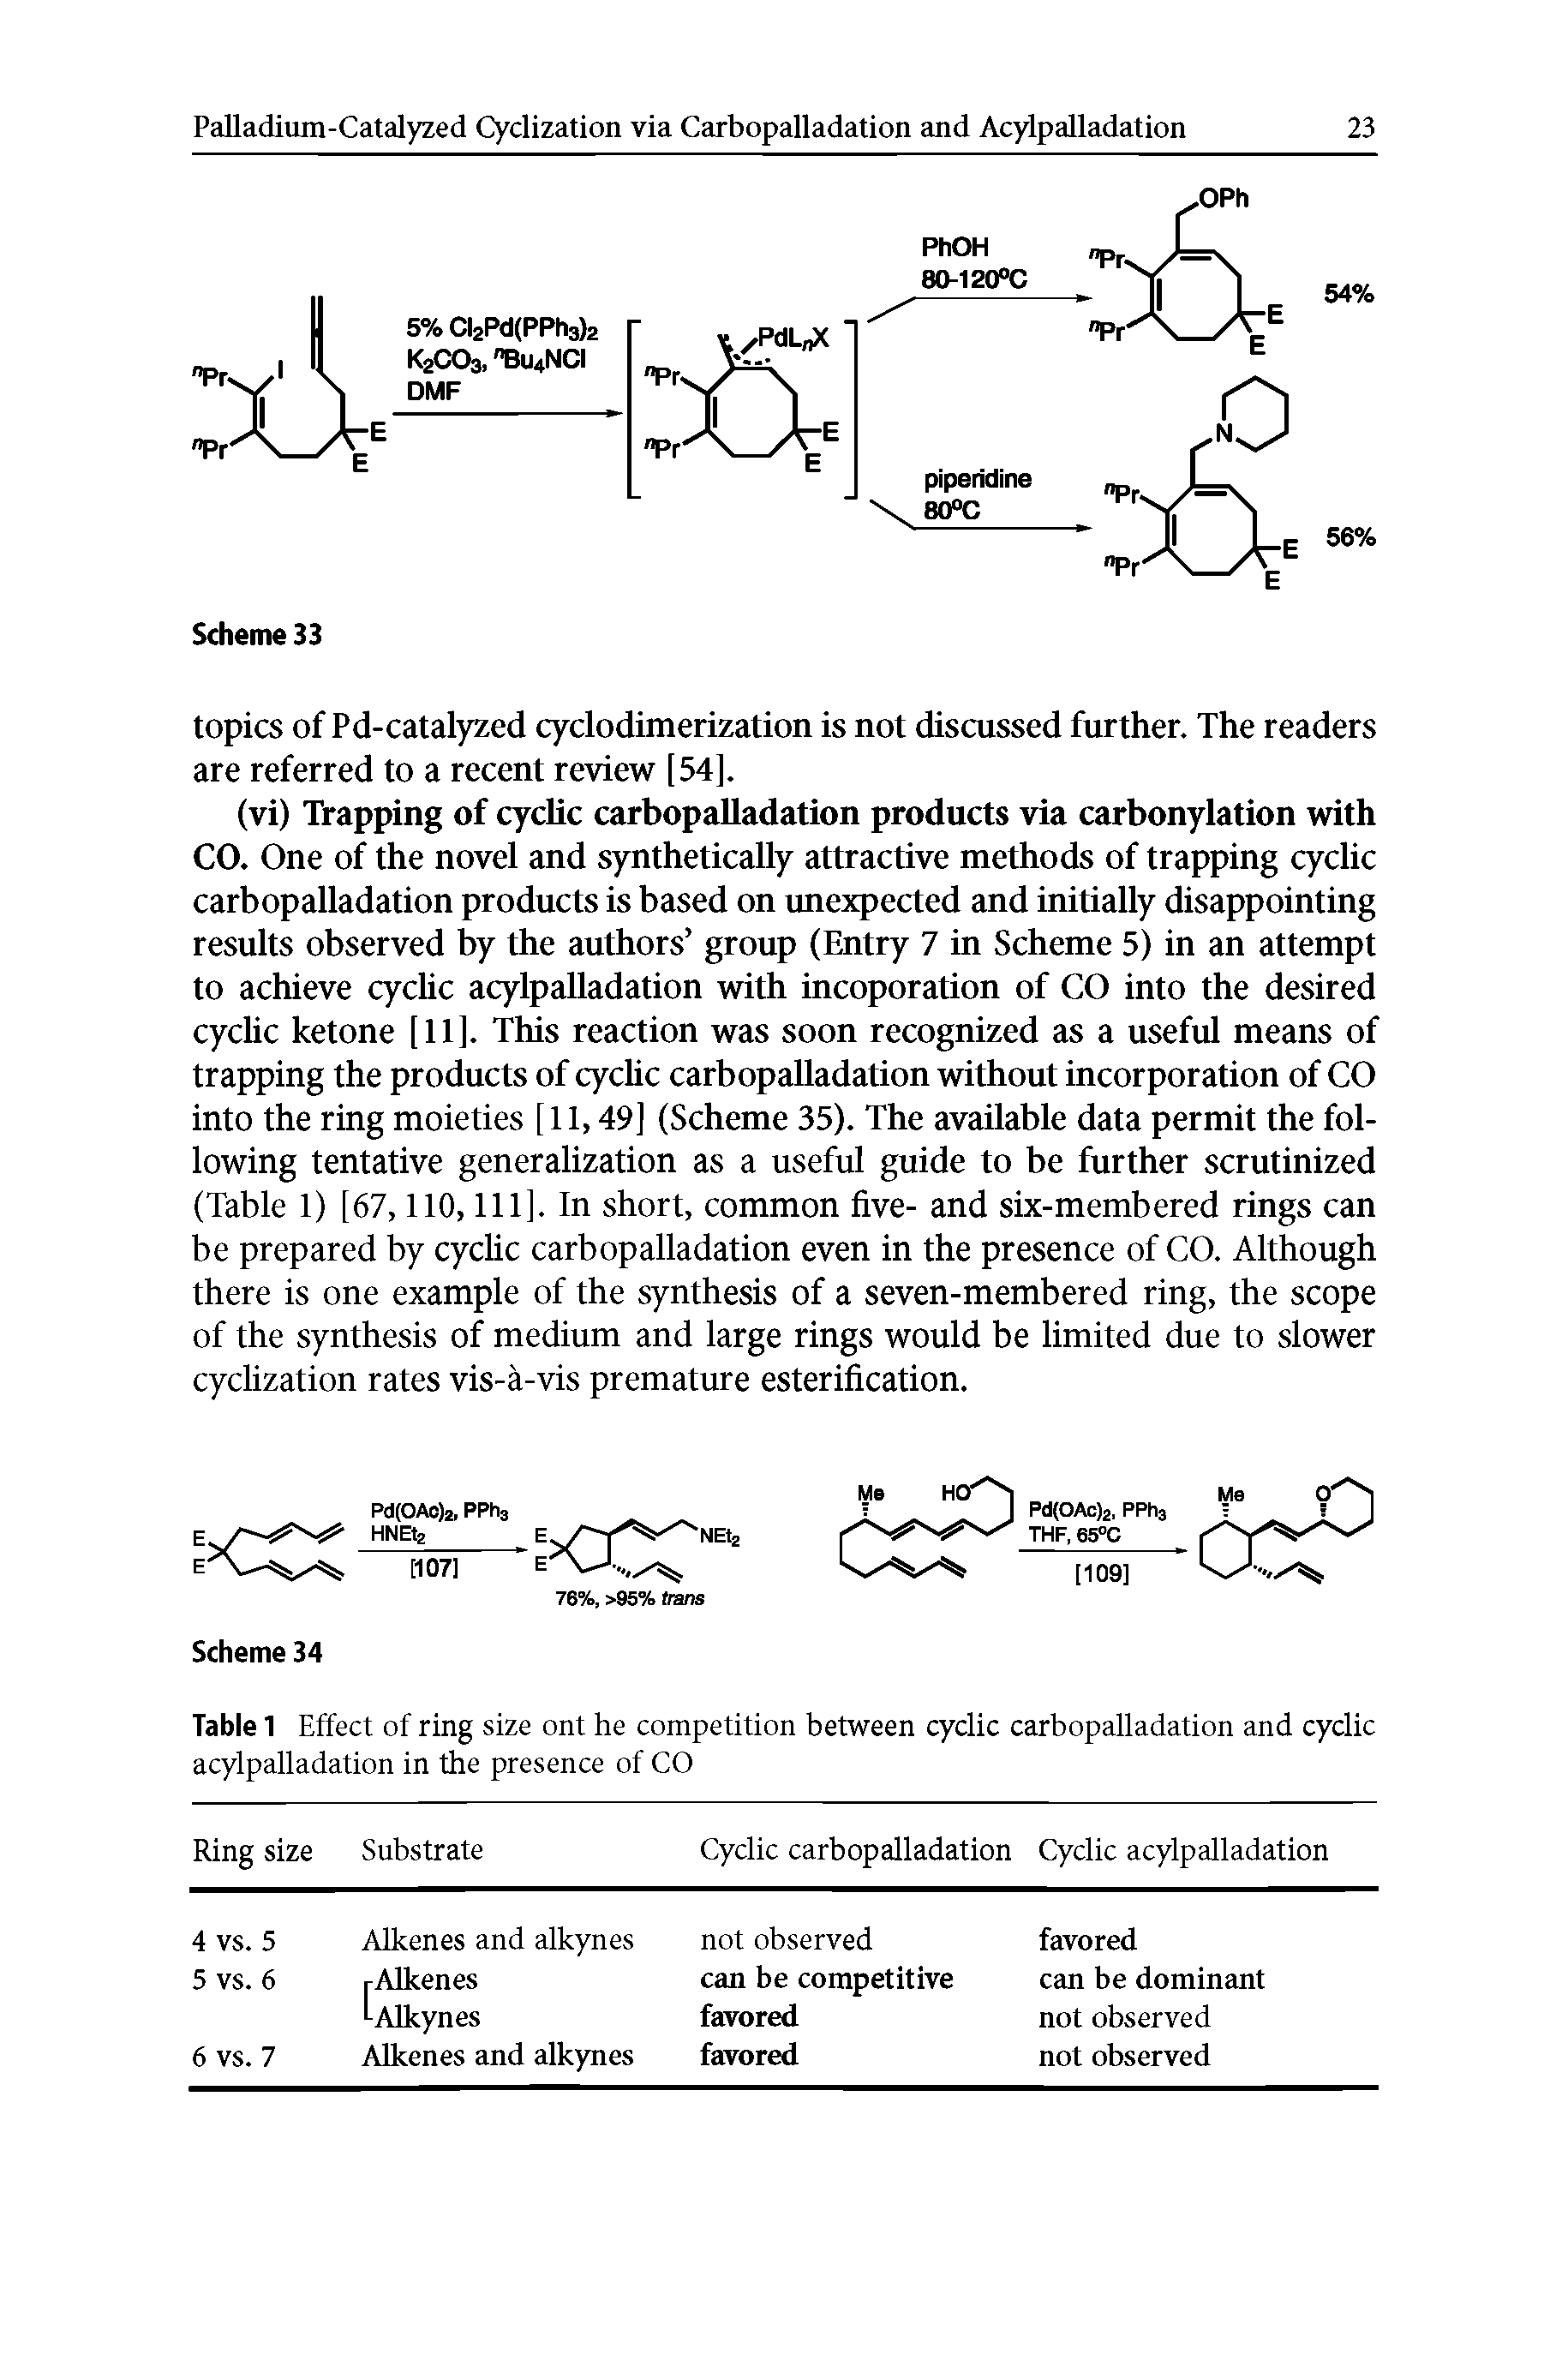 Table 1 Effect of ring size ont he competition between cyclic carbopalladation and cyclic acylpalladation in the presence of CO...